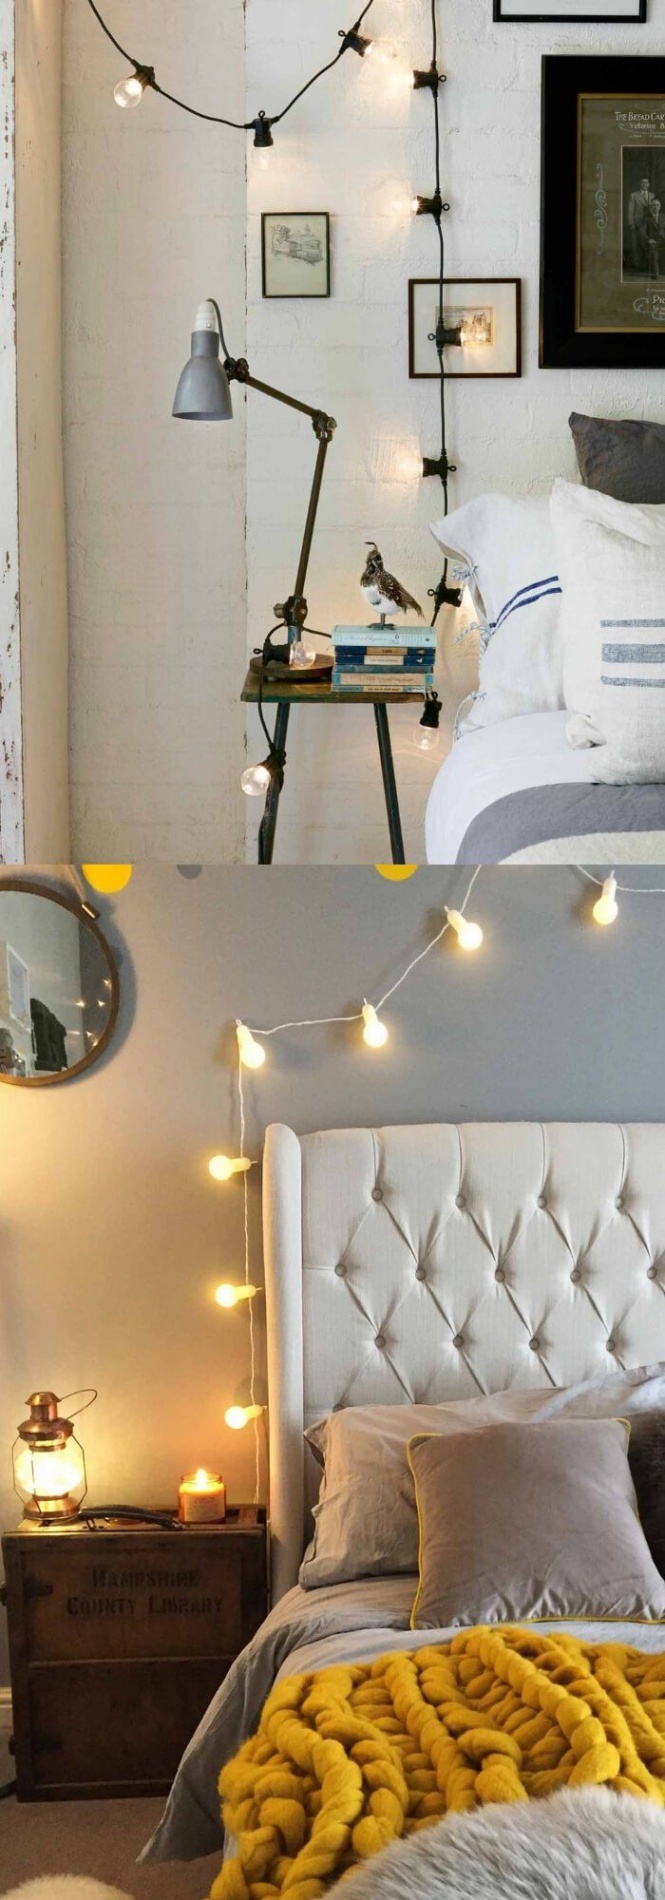 bed decoration with lights Bulan 4 + Awesome DIY Fairy Light Decor Ideas For Your House in